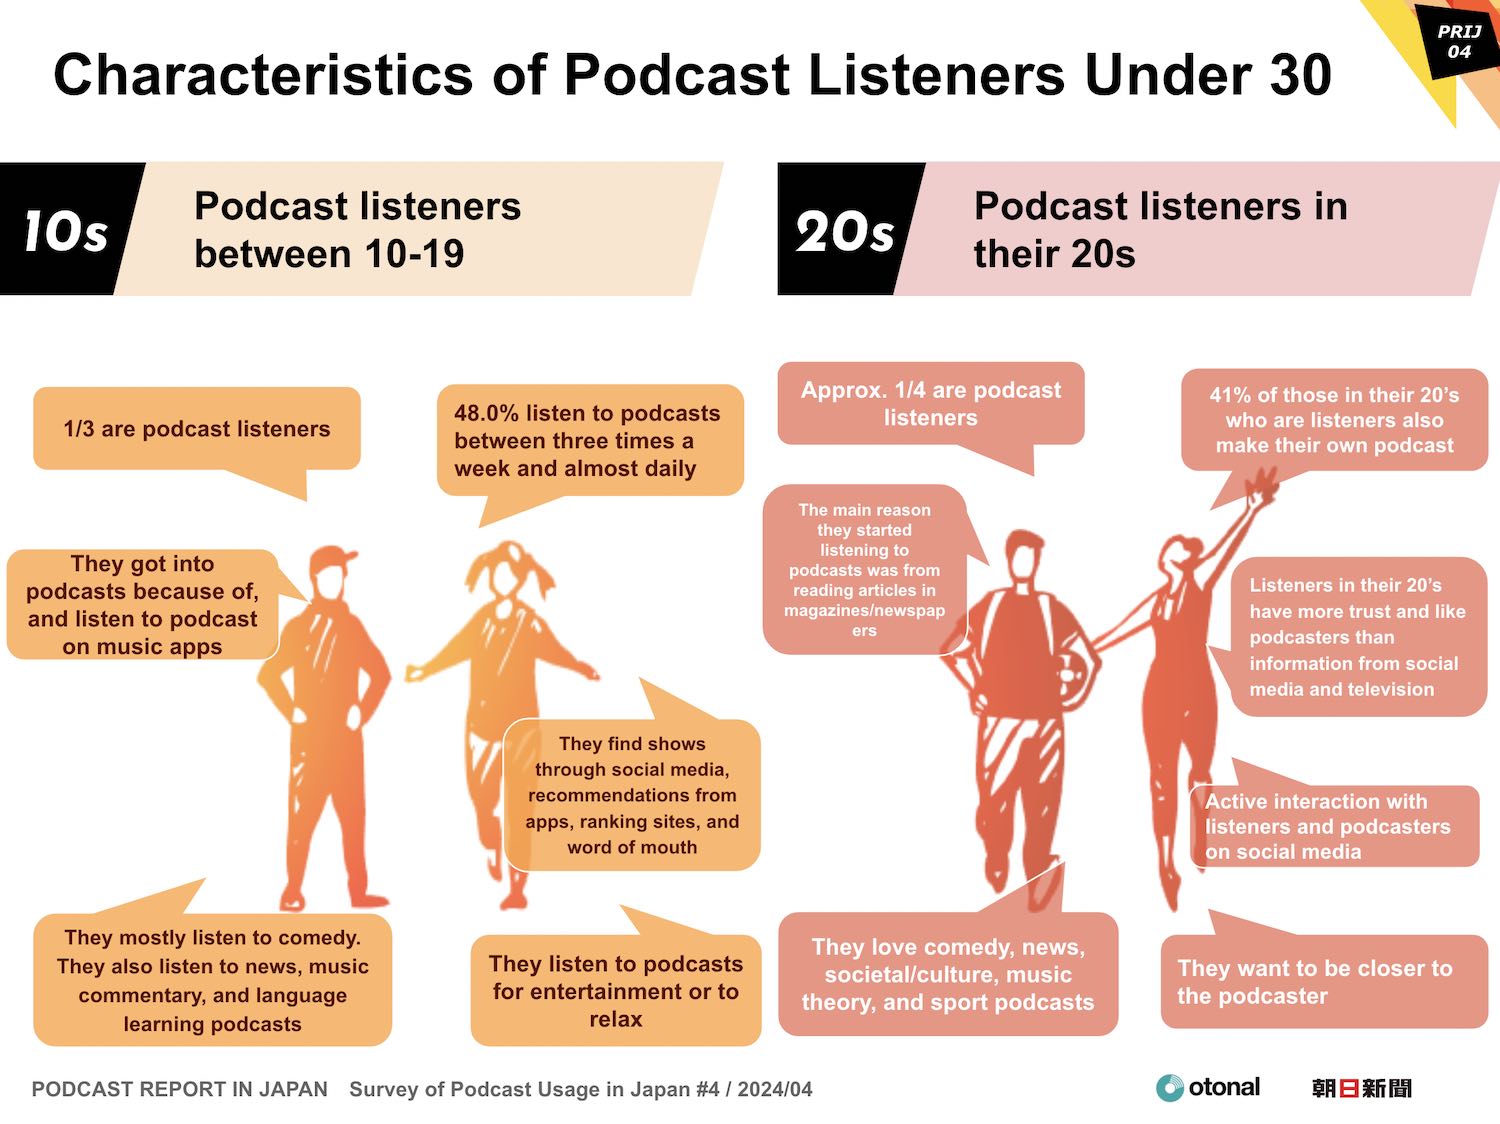 PODCAST REPORT IN JAPAN Survey of Podcast Usage in Japan #4